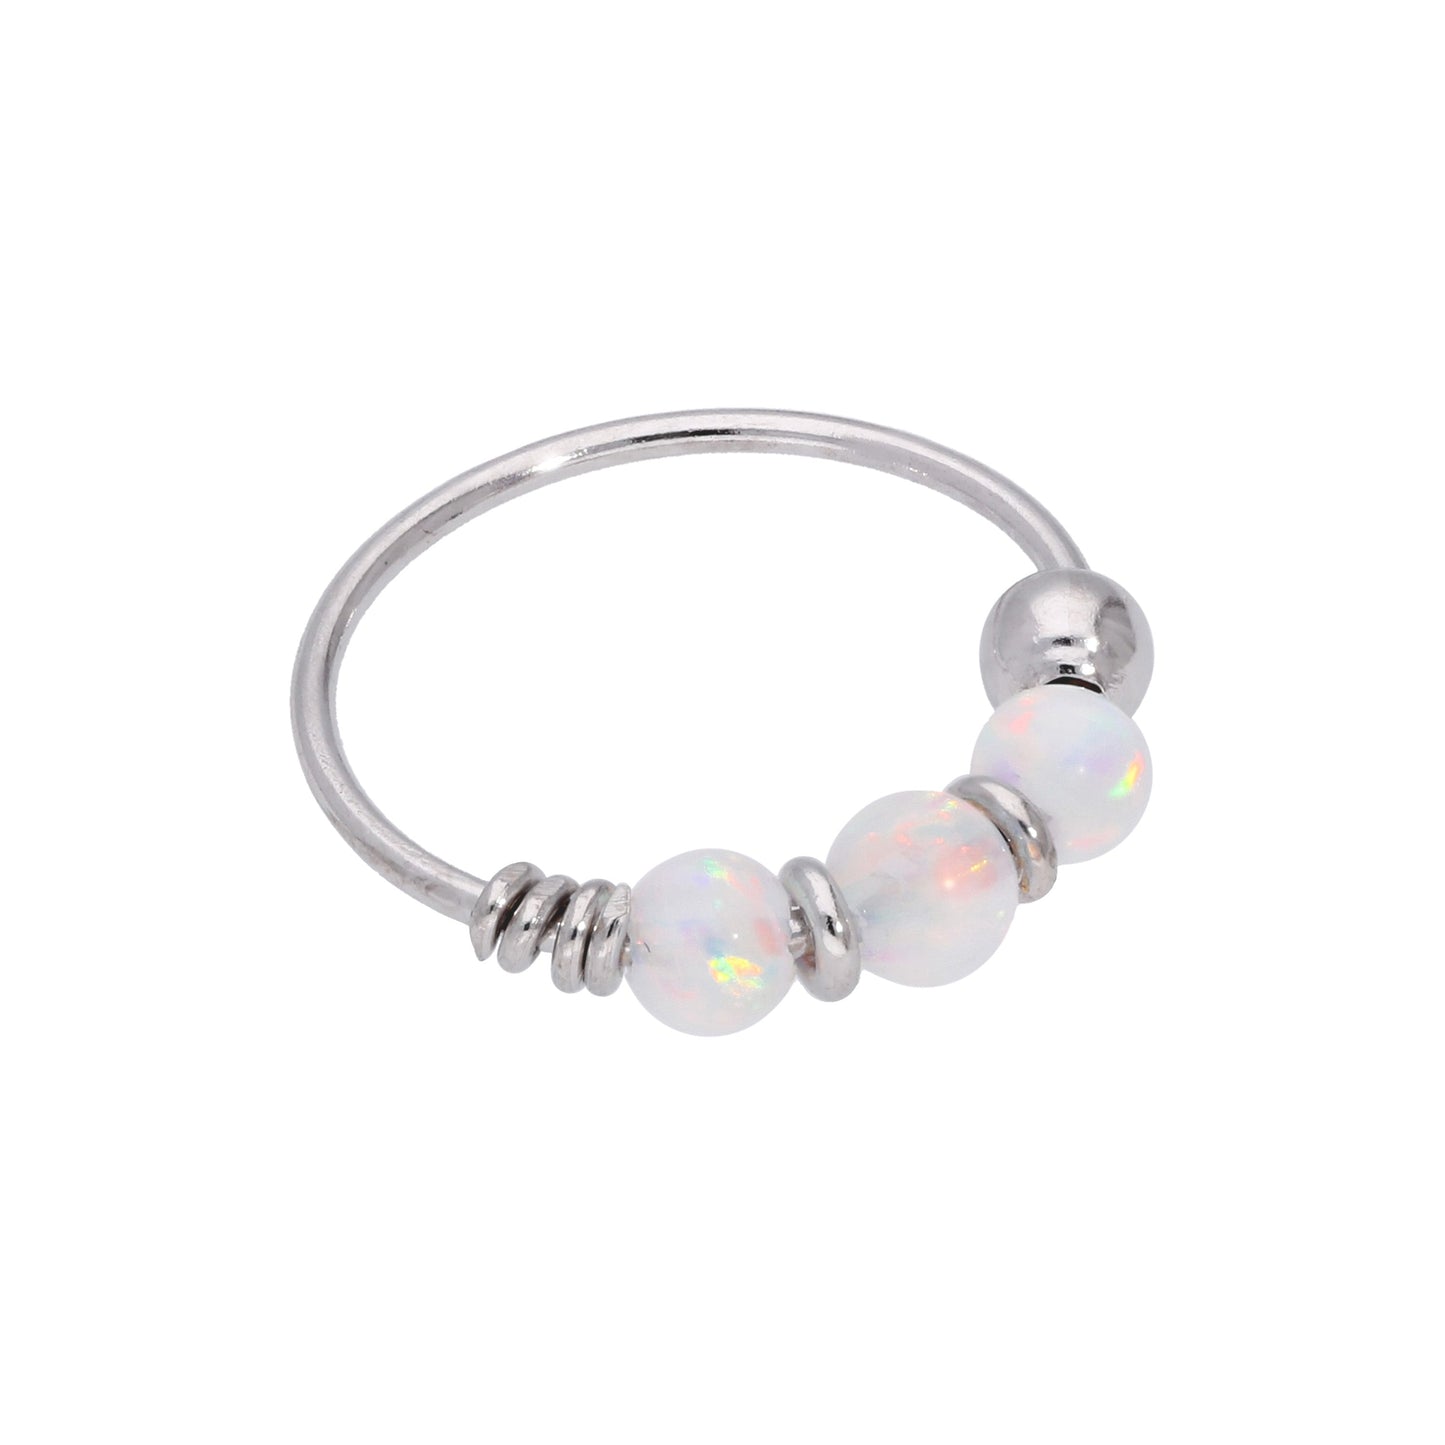 9ct White & Opal Beads Nose Ring